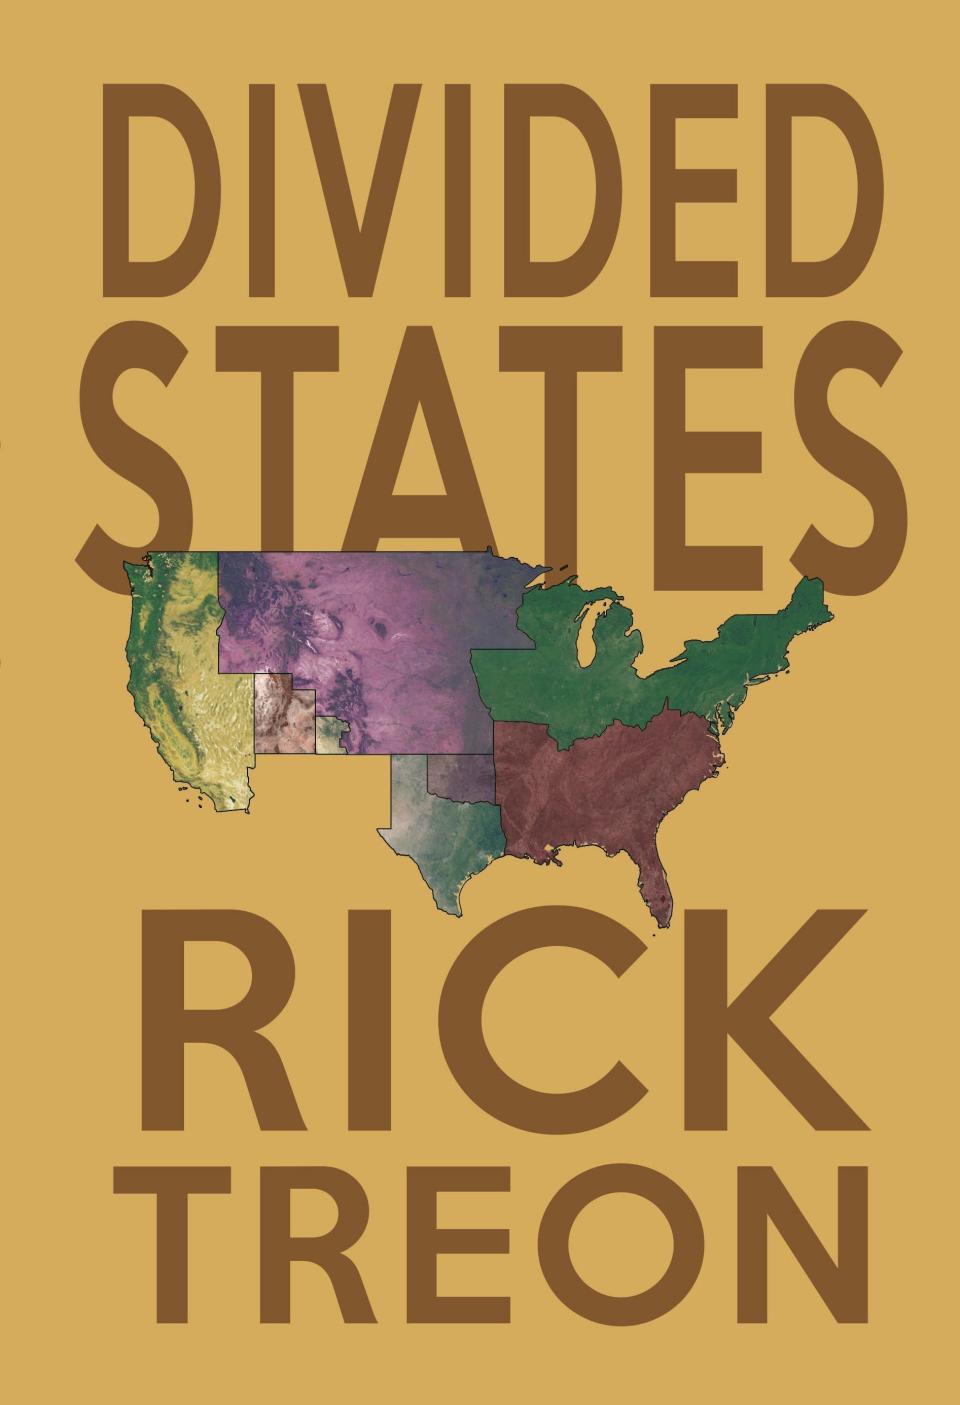 "Divided States" by Rick Treon